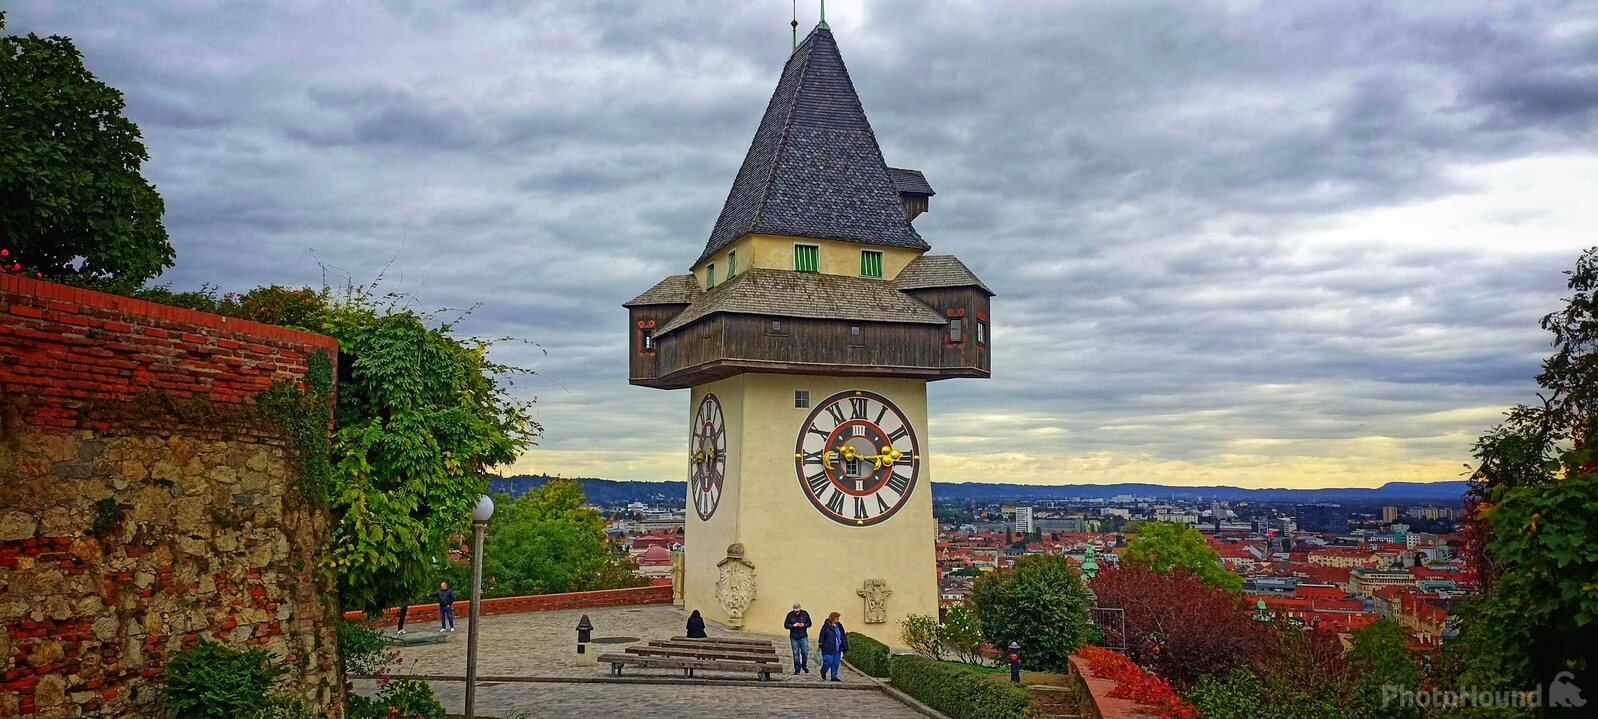 Image of Clock Tower (Uhrturm). by David Lally